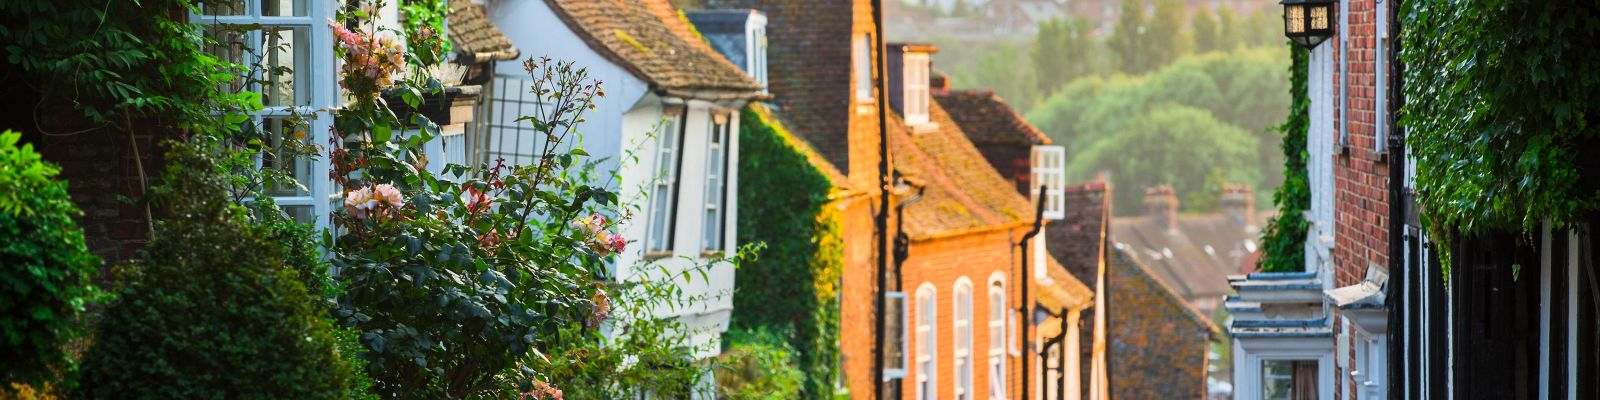 Holiday Cottages In East Sussex To Rent Self Catering East Sussex